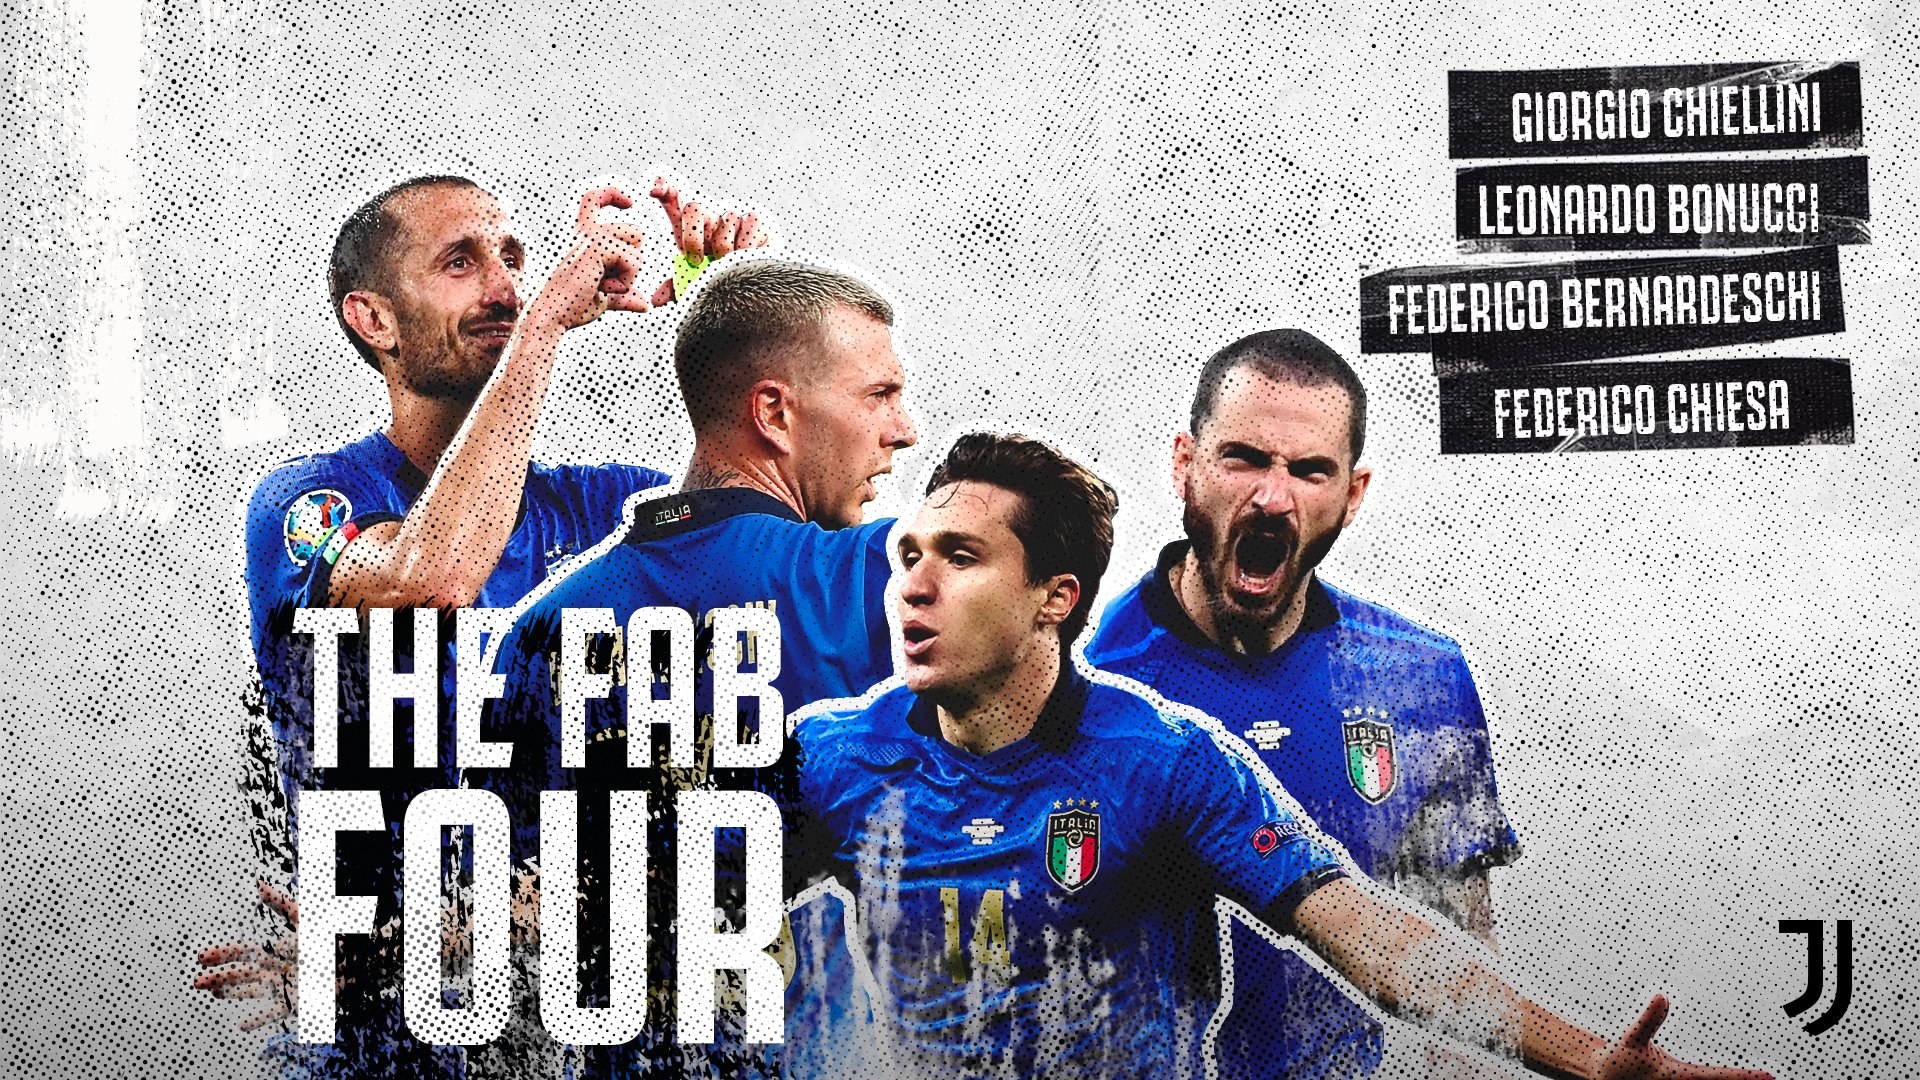 How Many Juventus Italians Were Champions of the World or Europe in the Azzurri’s History?